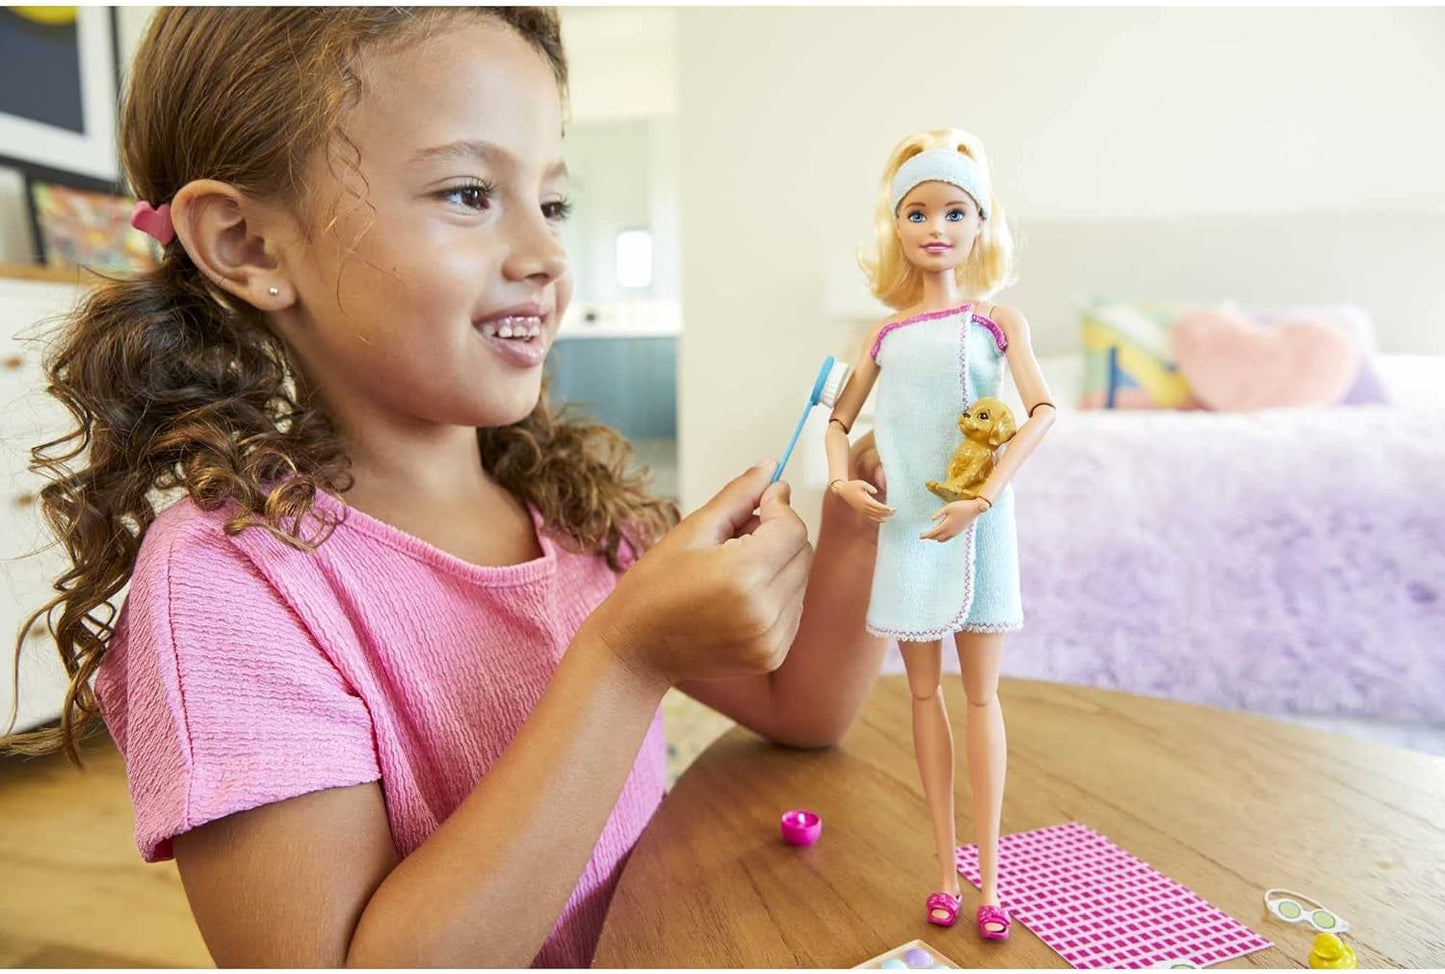 Barbie Wellness Playset With Doll (Styles Vary)